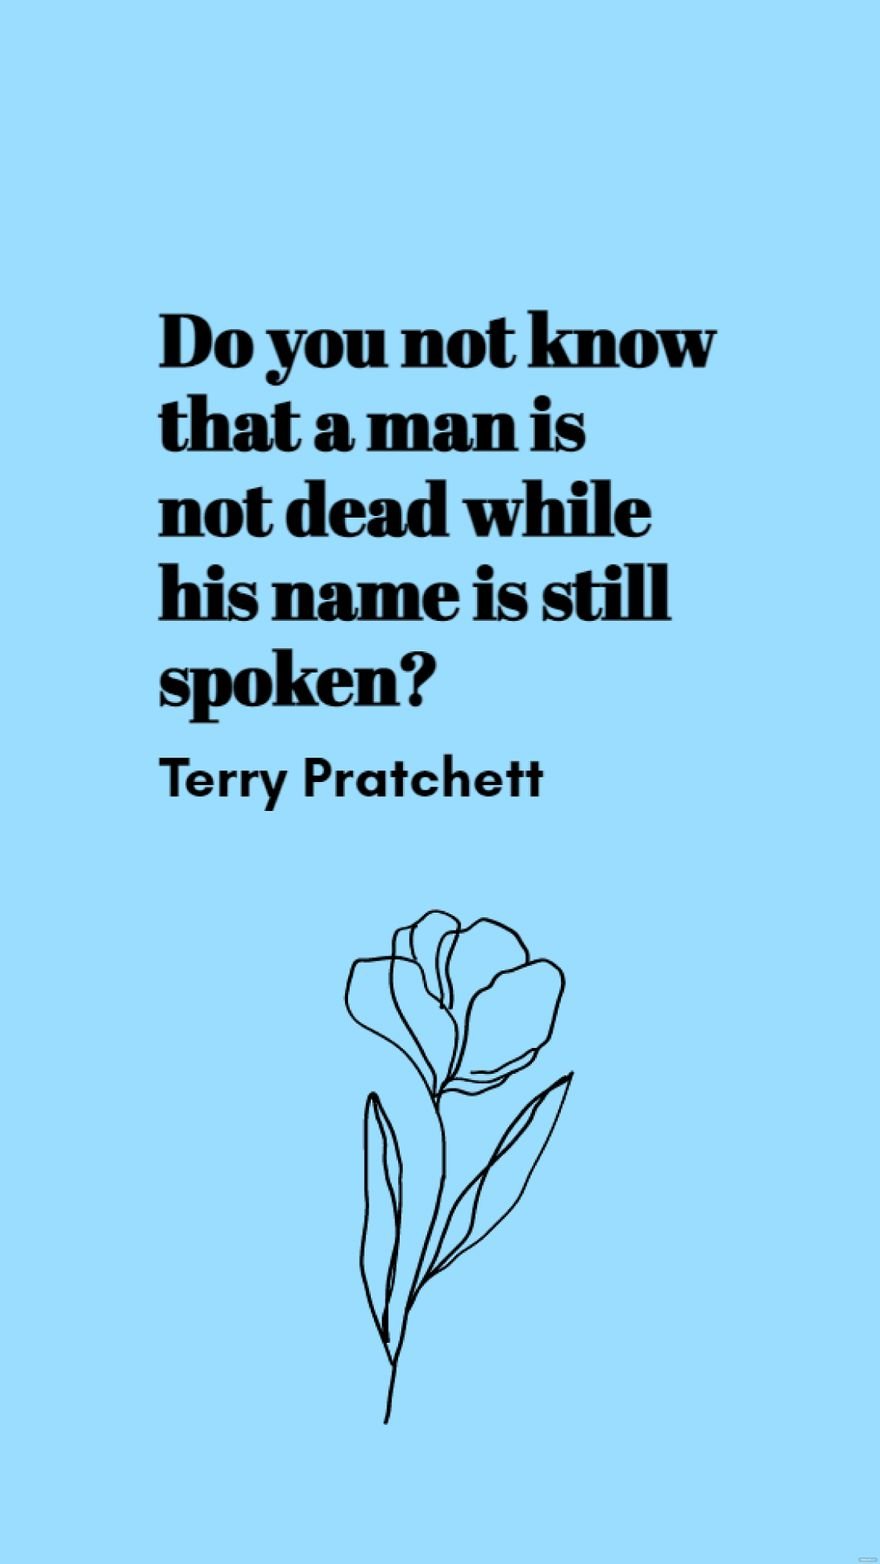 Terry Pratchett - Do you not know that a man is not dead while his name is still spoken?